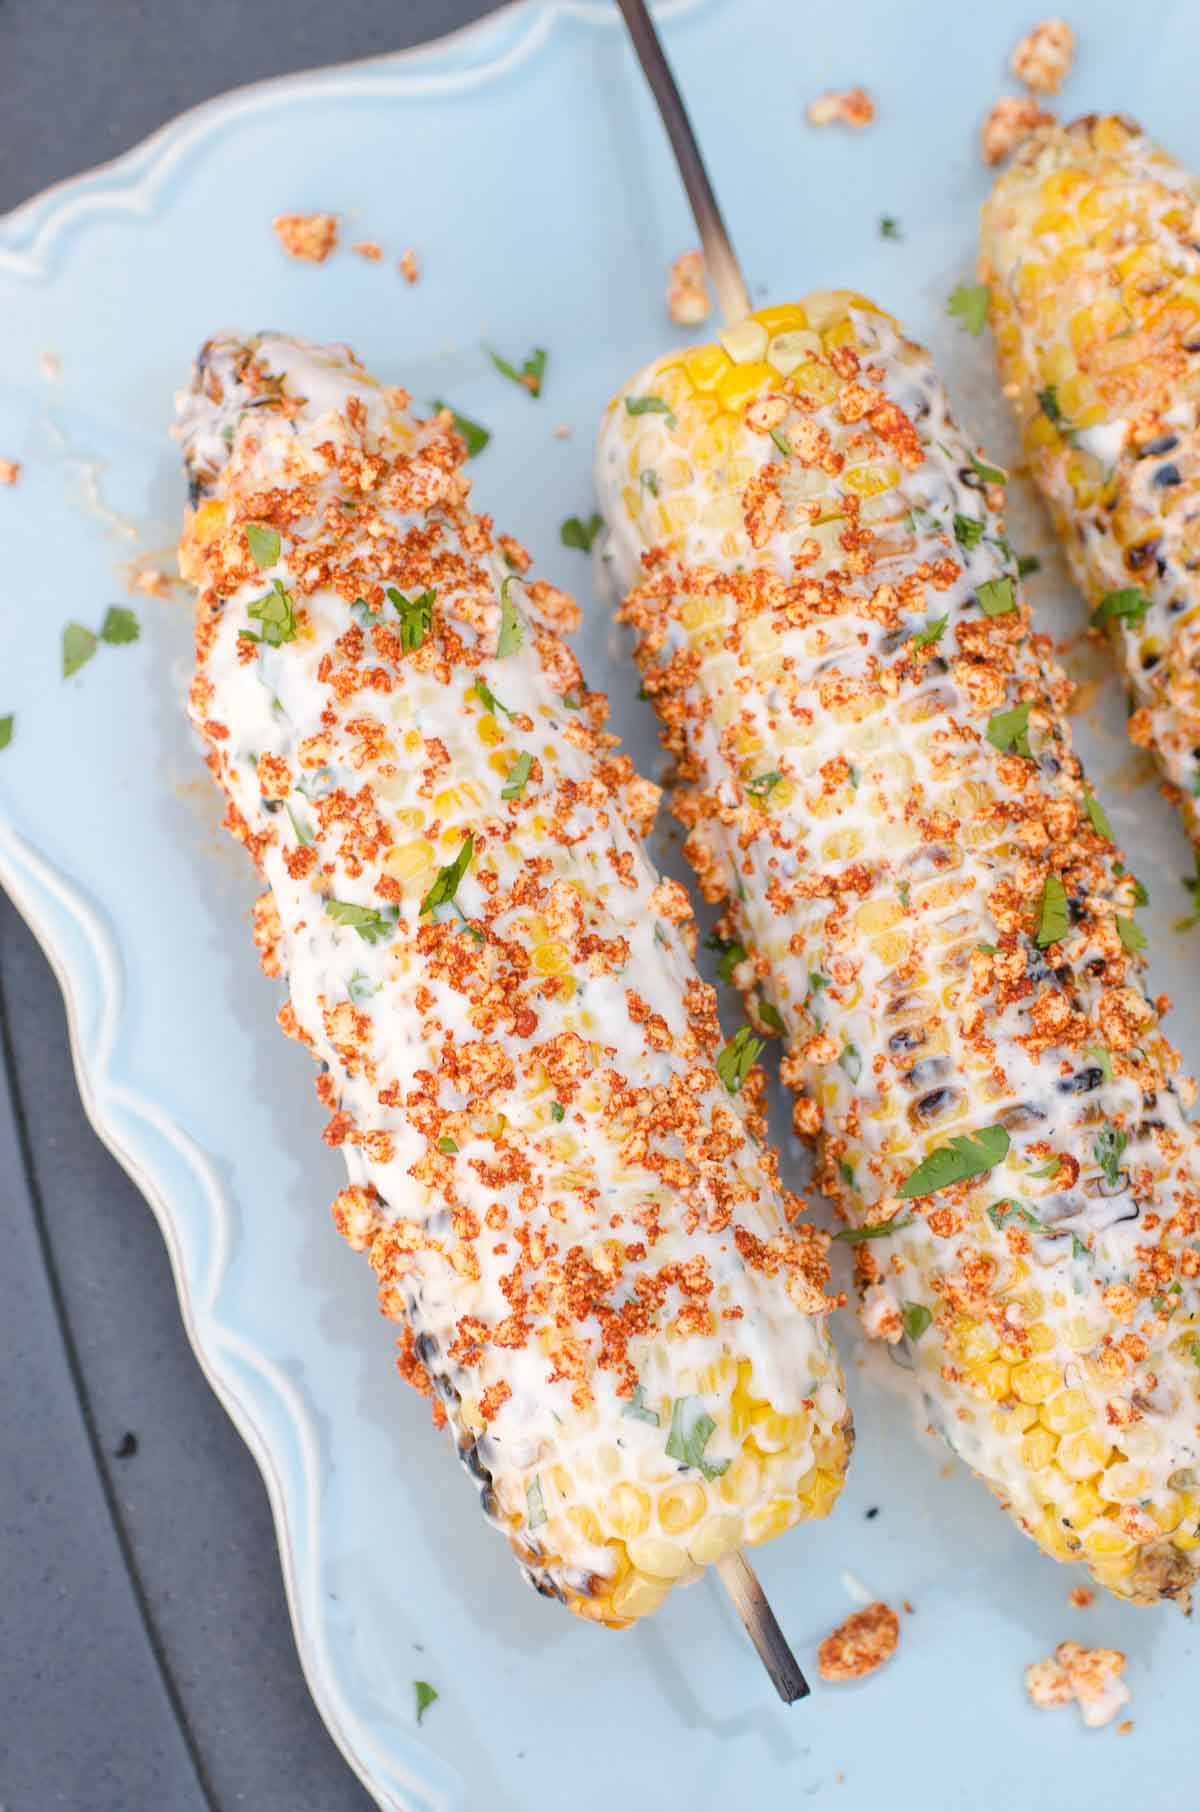 Mexican Street Corn Recipe + VIDEO - Easiest recipe for home cooks!